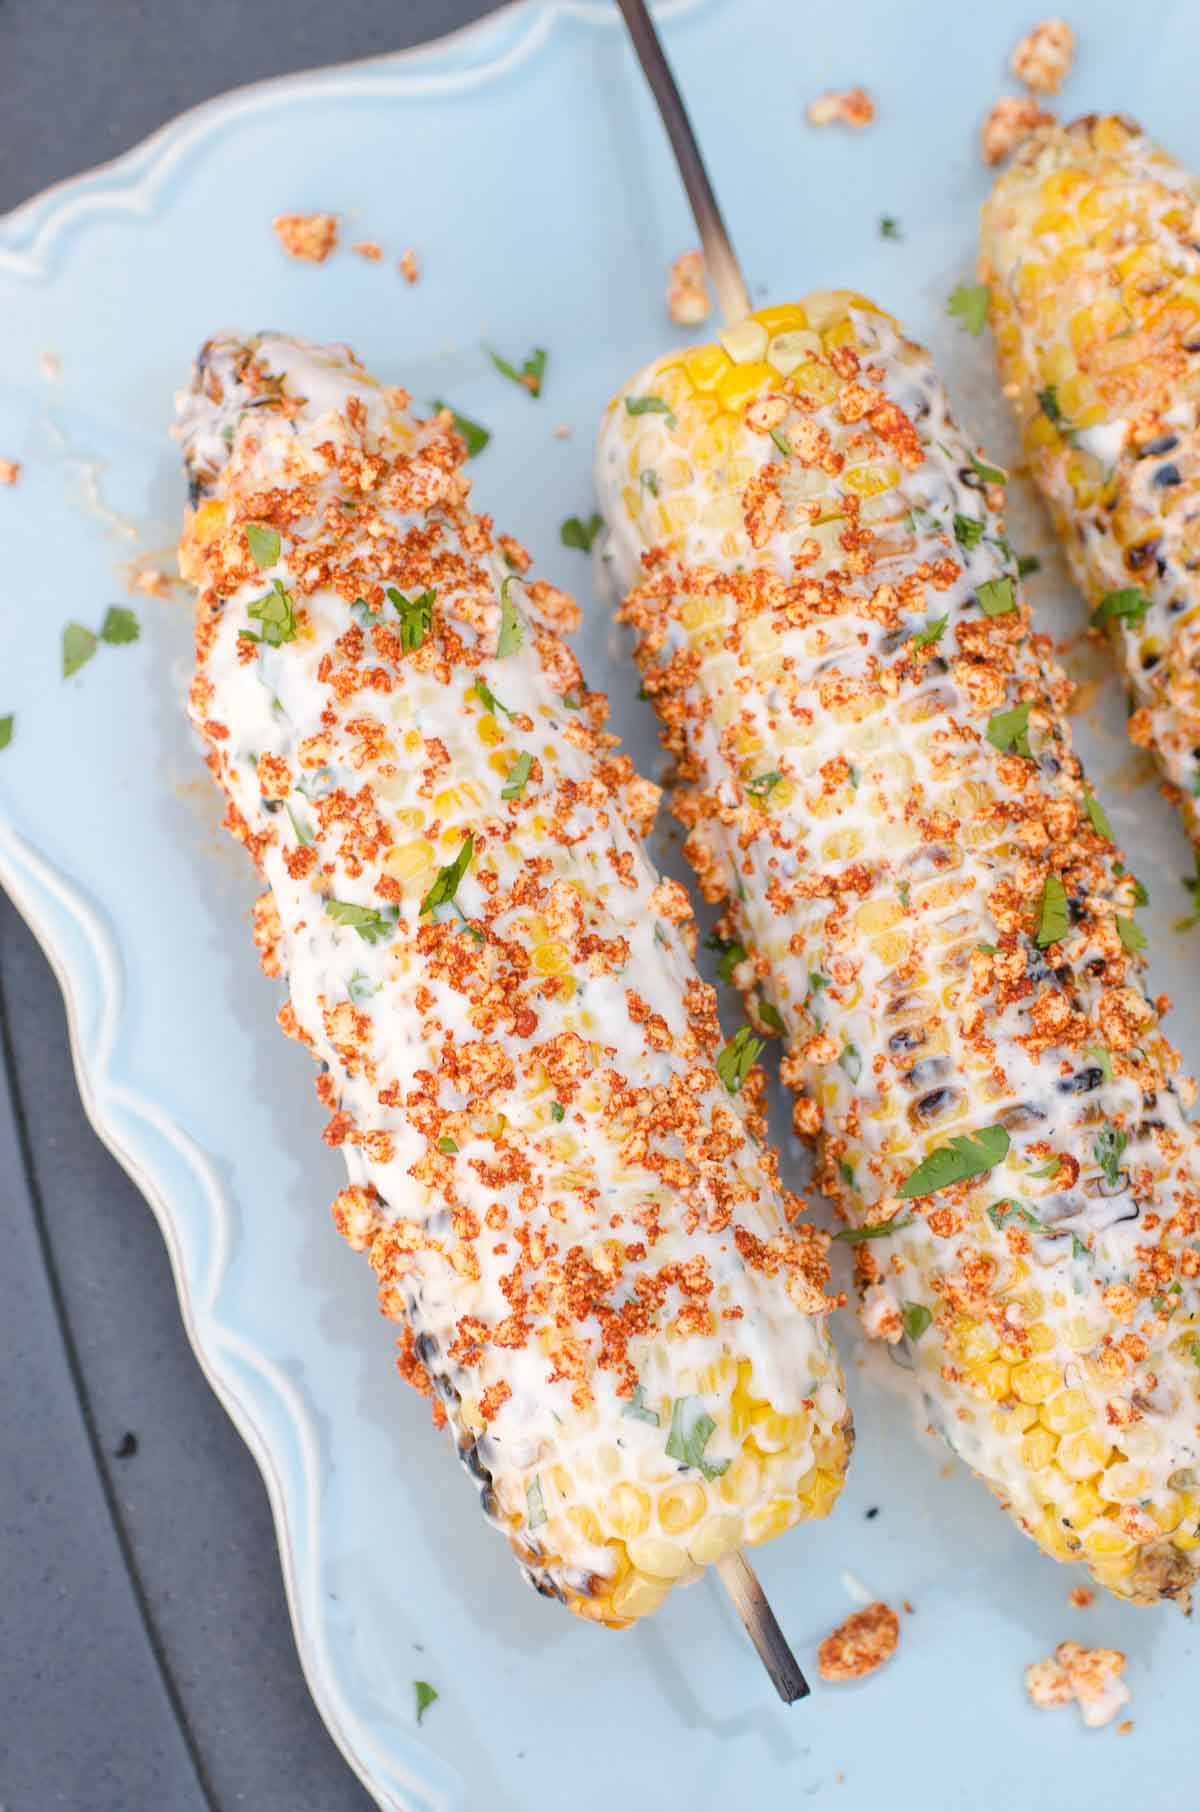 Mexican Street Corn Recipe + VIDEO - Easiest recipe for home cooks!